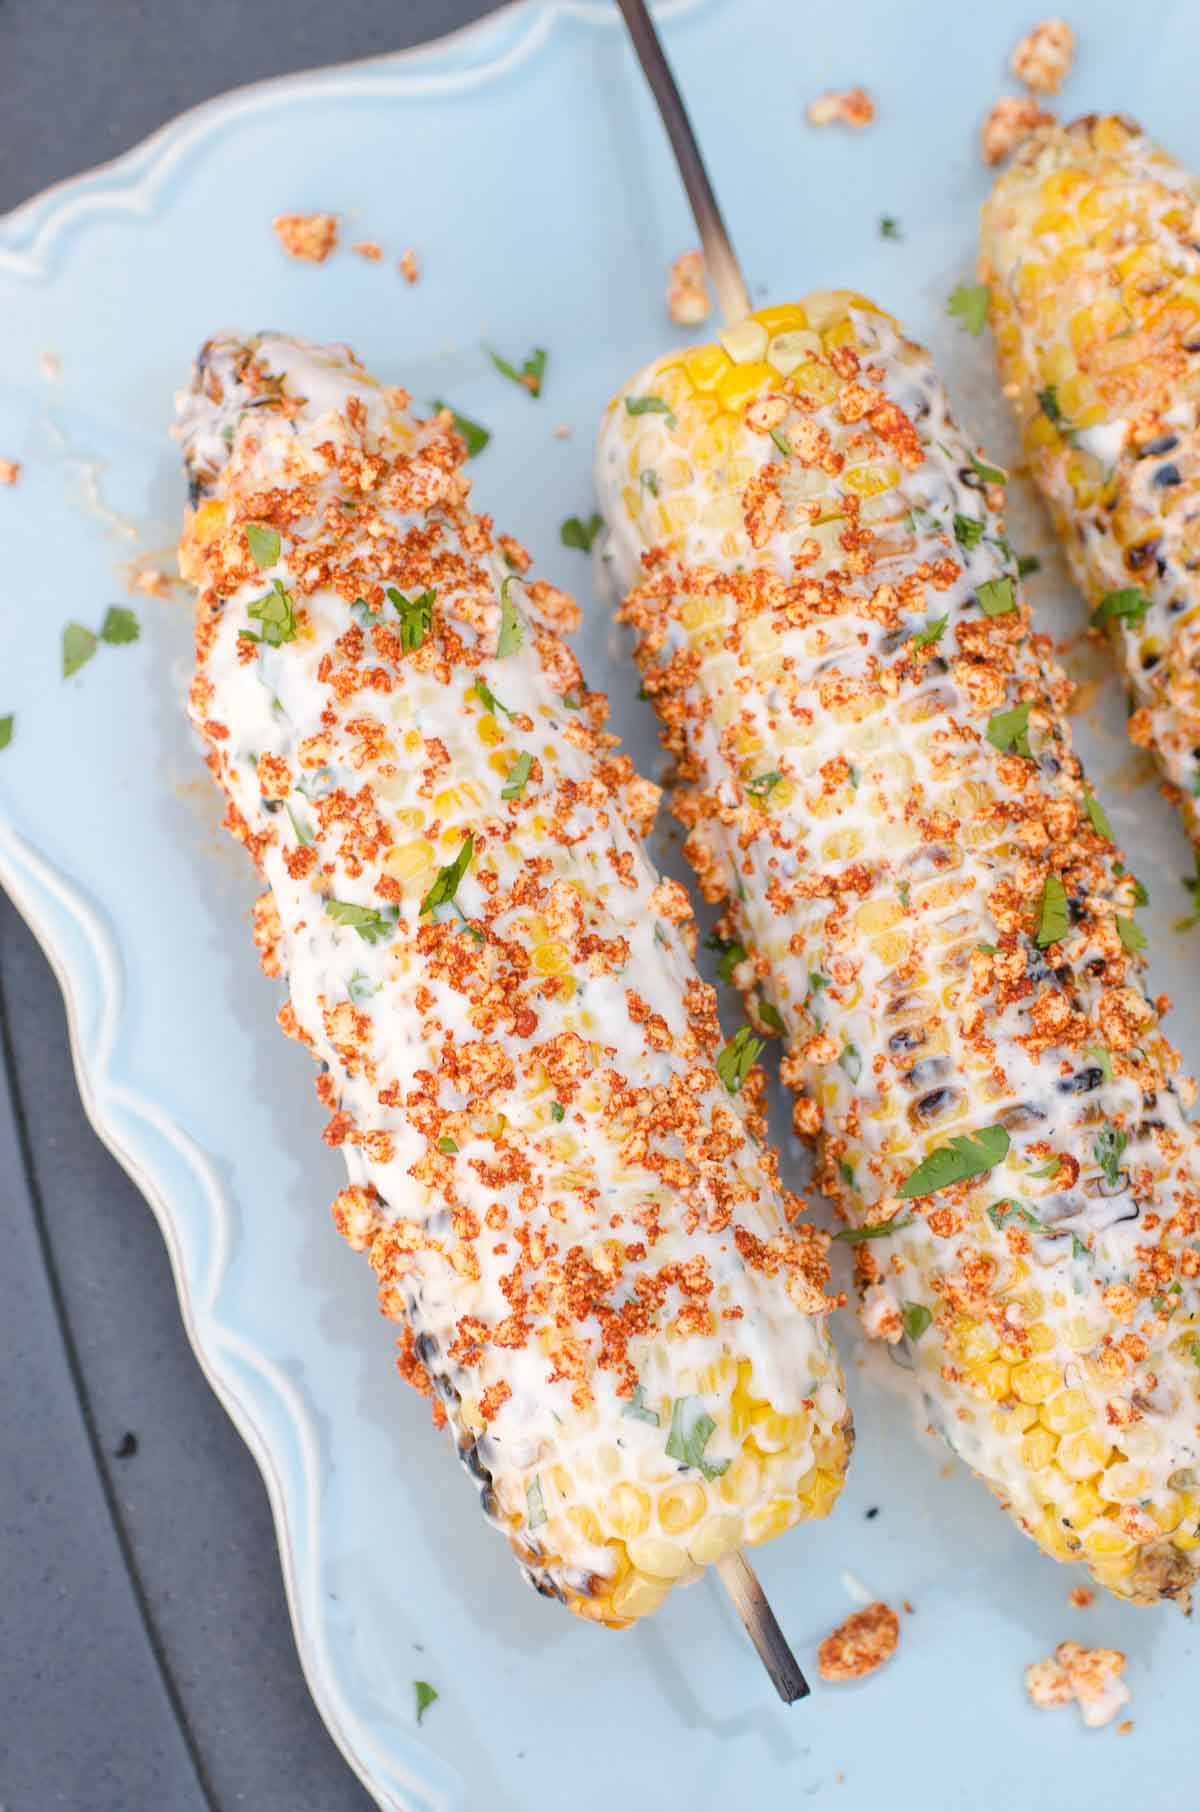 Mexican Street Corn Recipe + VIDEO - Easiest recipe for home cooks!